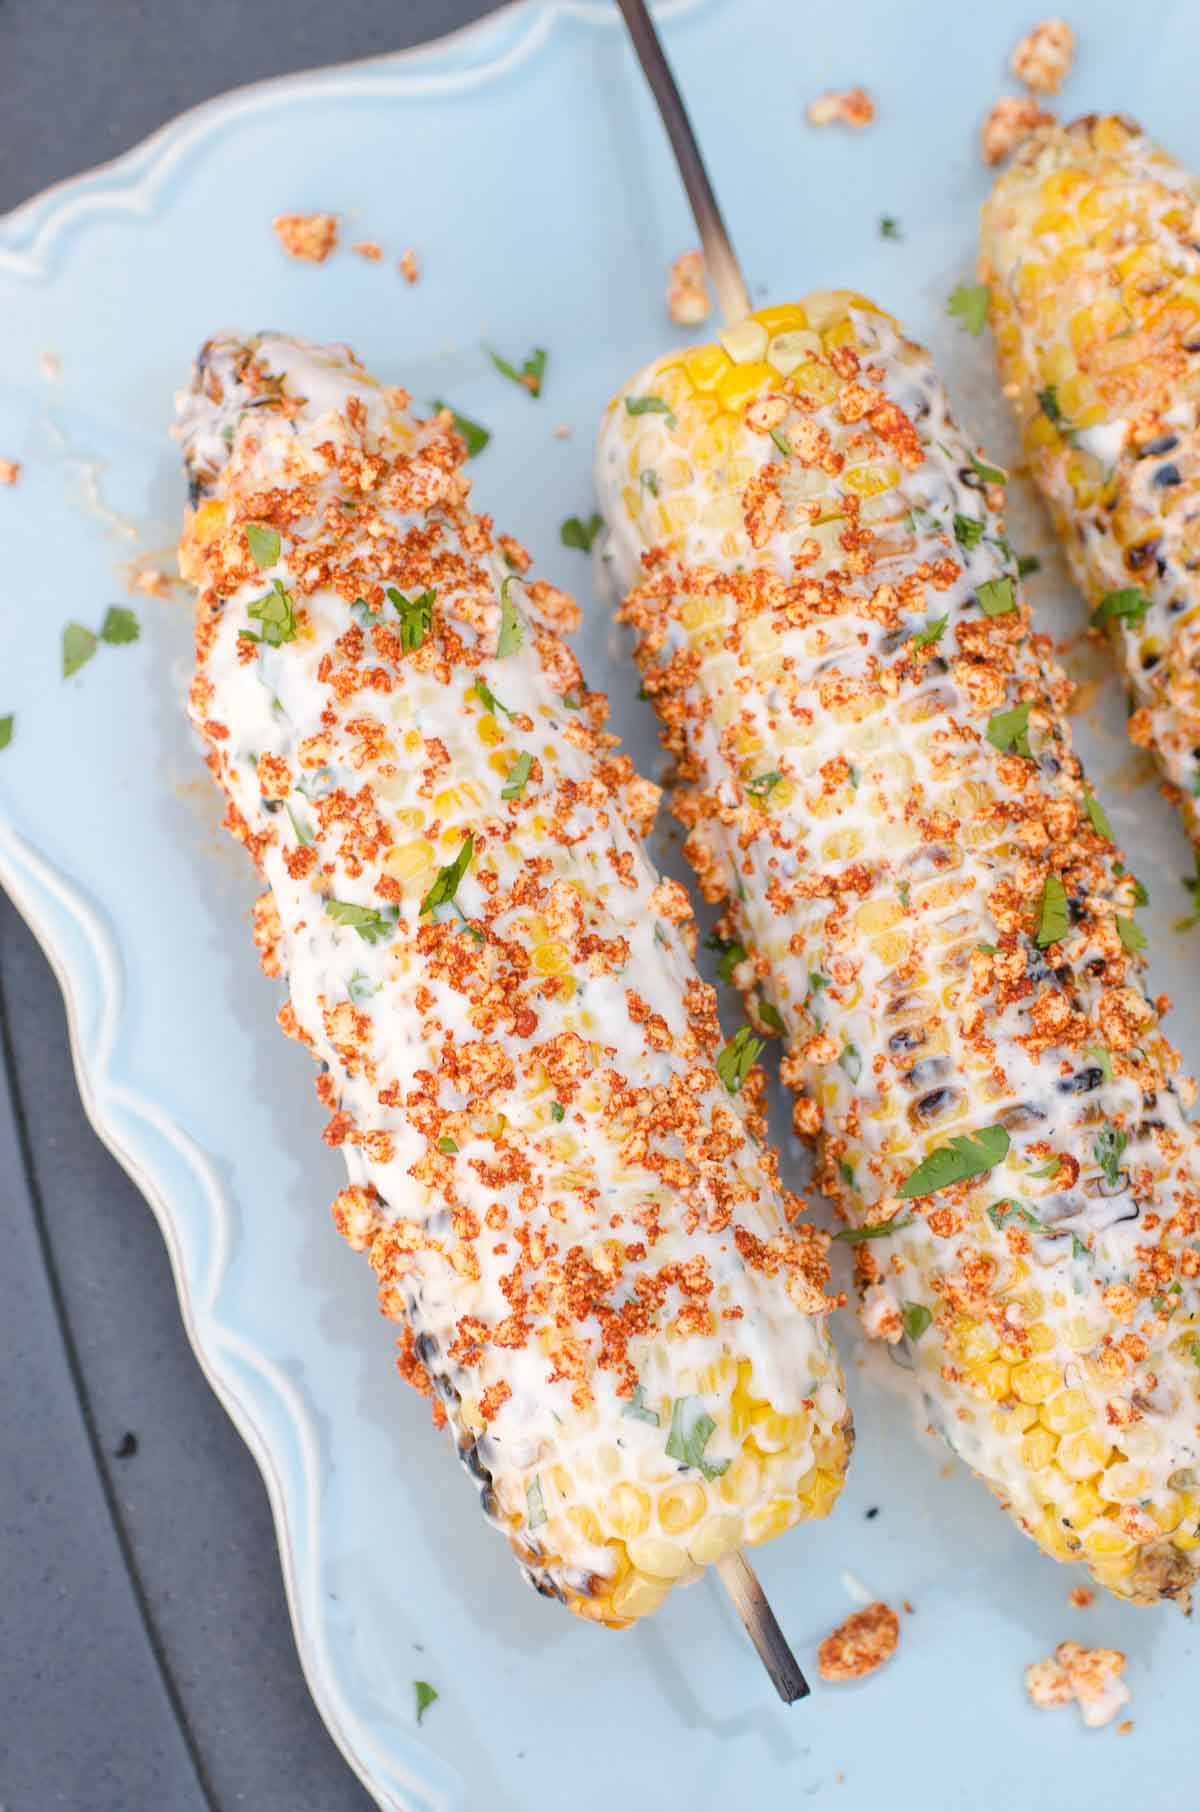 Mexican Street Corn Recipe + VIDEO - Easiest recipe for home cooks!